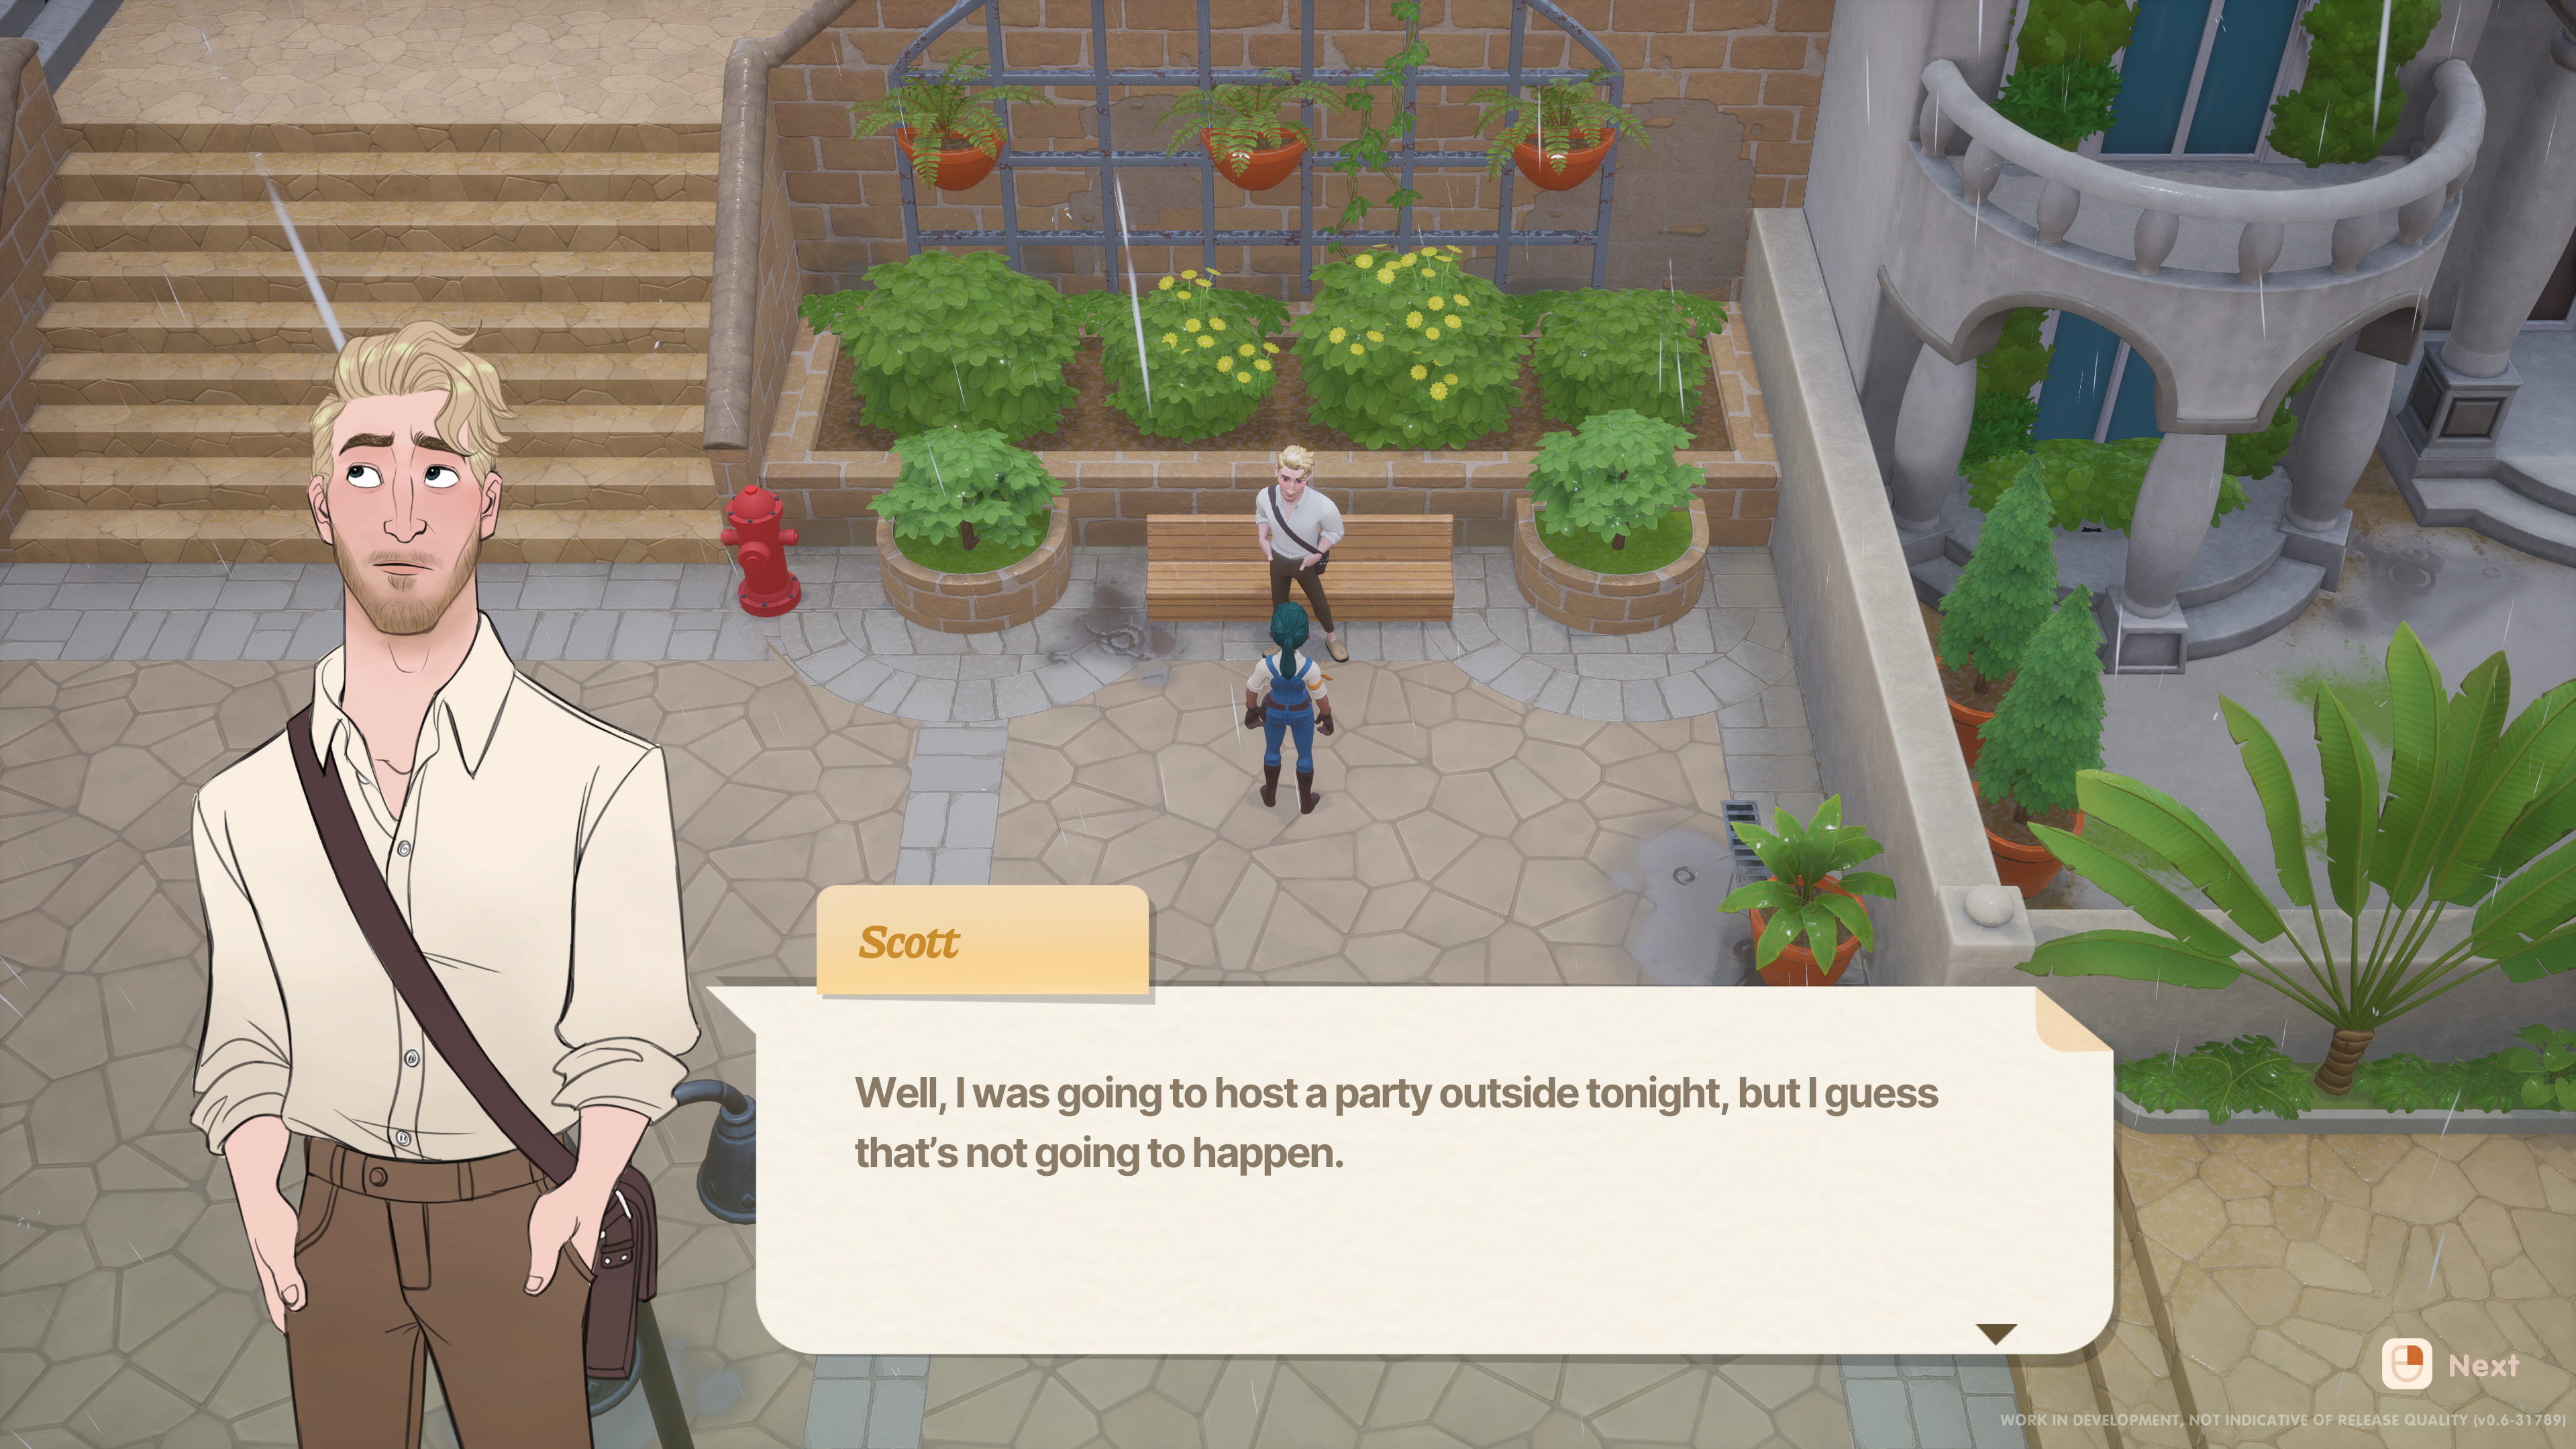 Image of the game Coral Island with the player talking to a character named Scott who looks at the rain and says "Well I was going to host a party outside tonight, but I guess that's not going to happen."